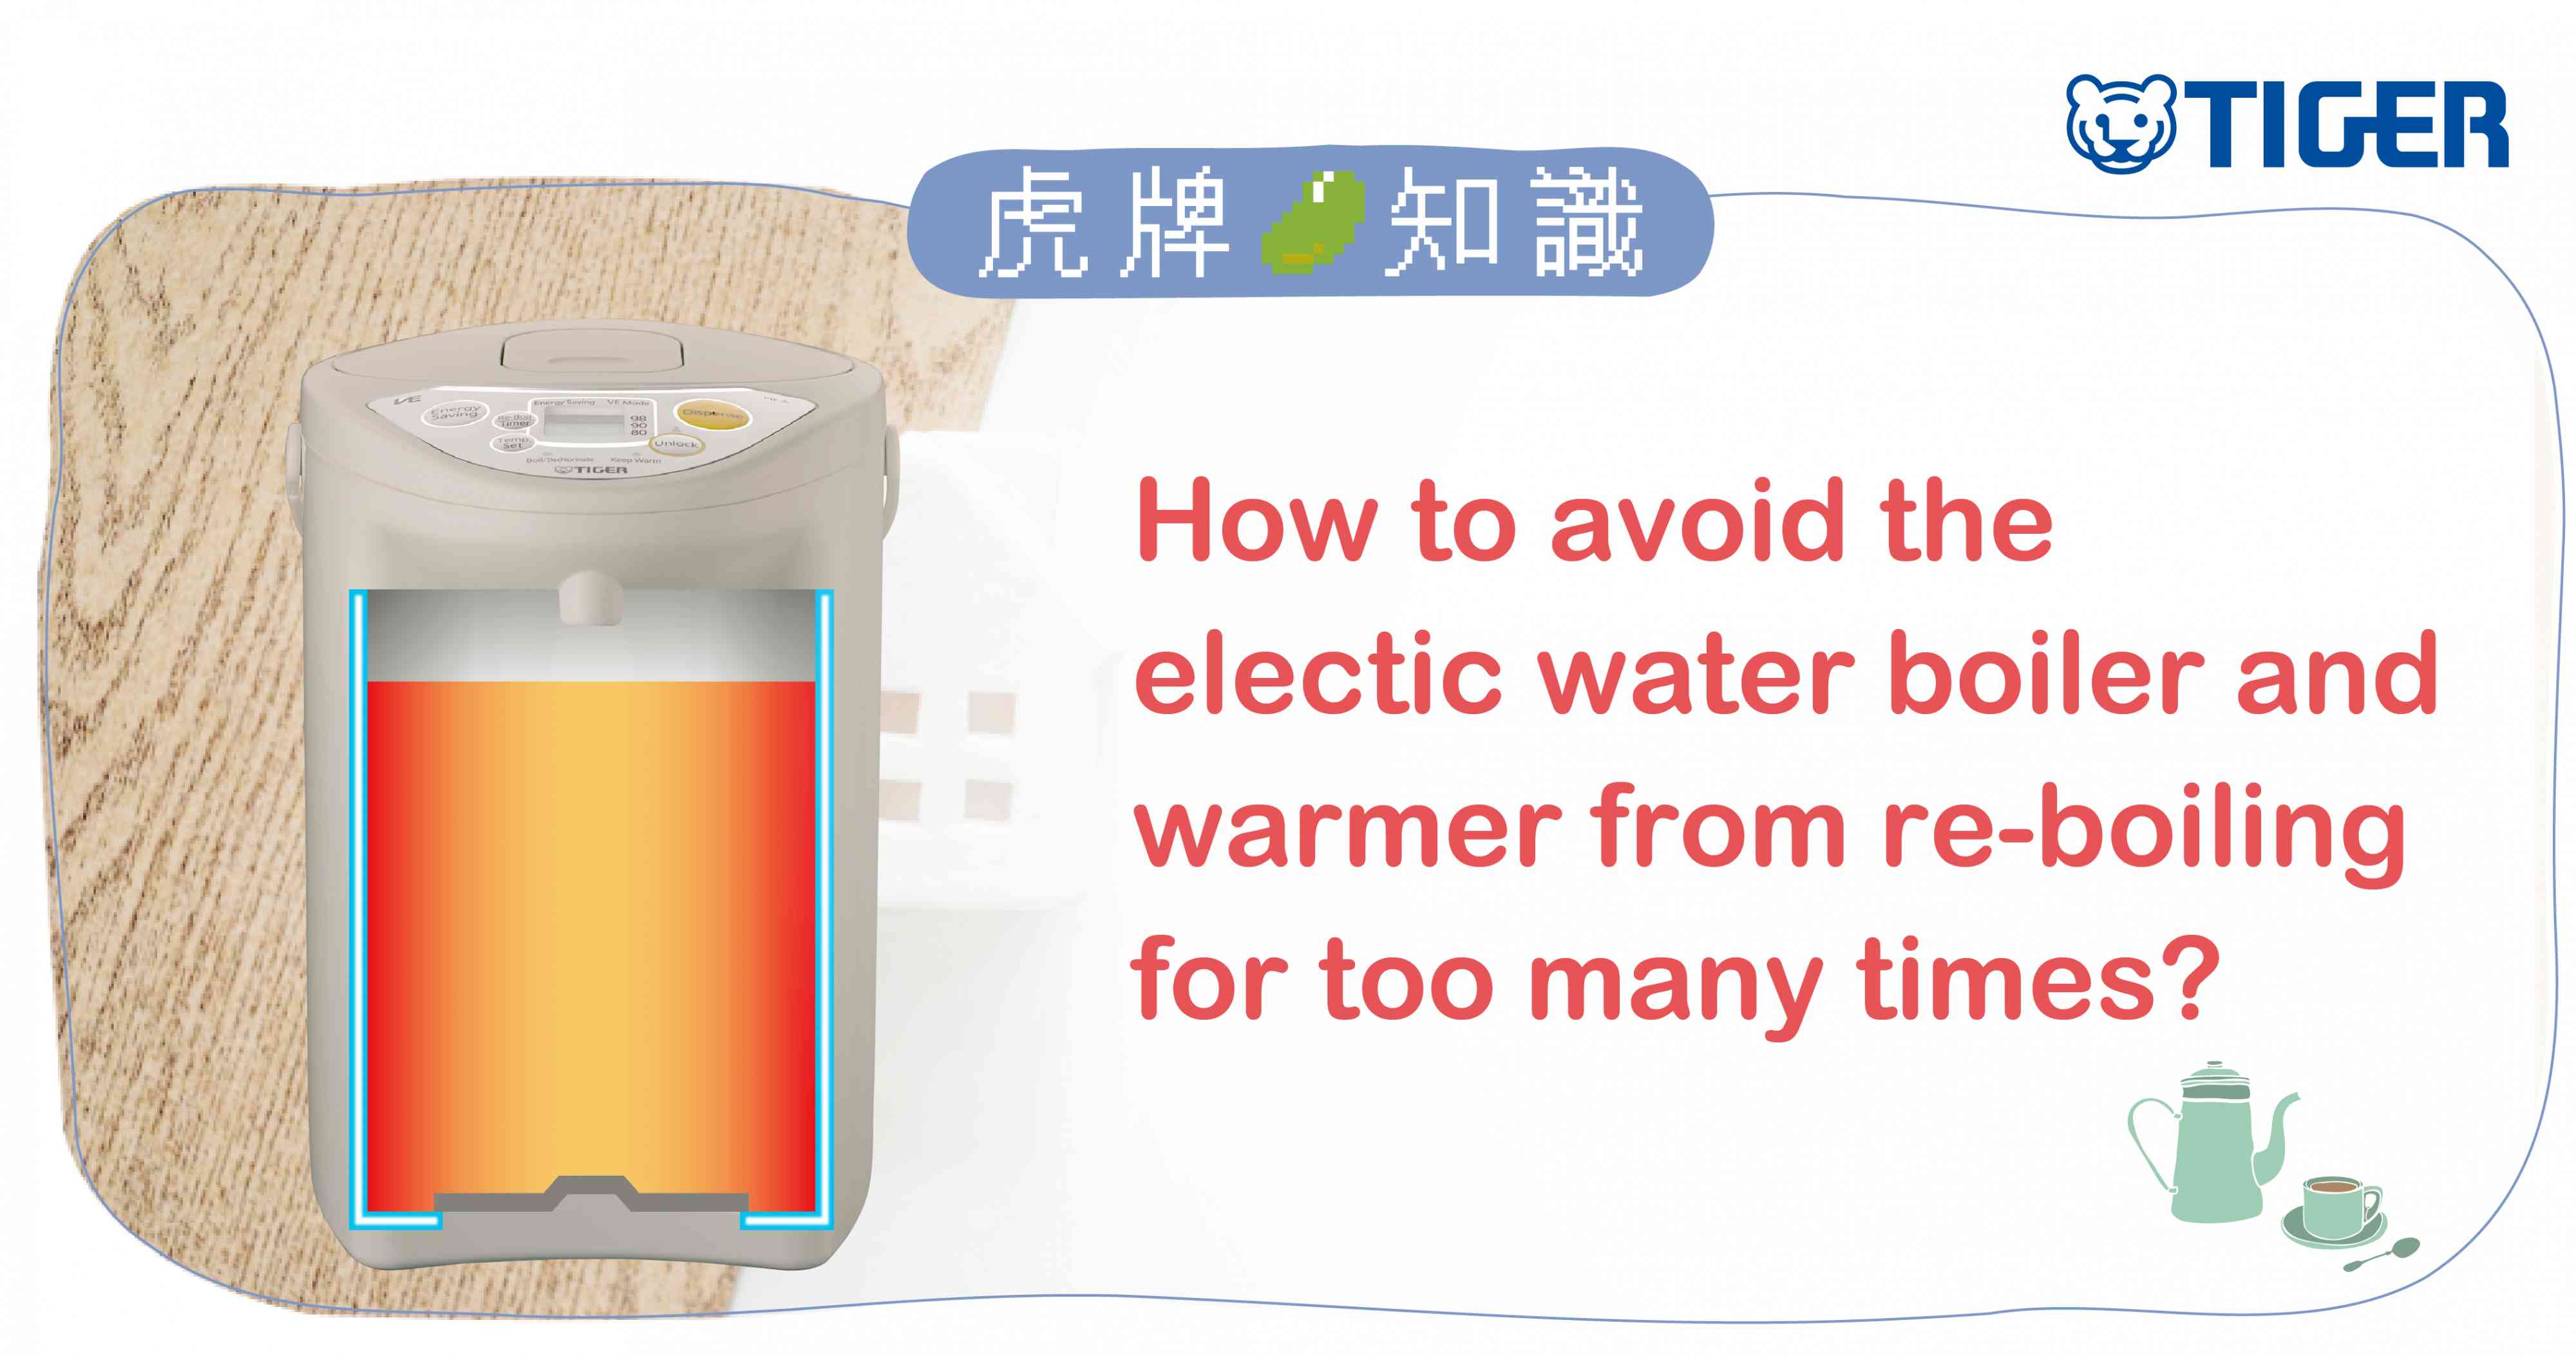 tiger-trivia-the-electic-water-boiler-and-warmer-from-re-boiling-for-too-many-times-en-2.jpg (274 KB)